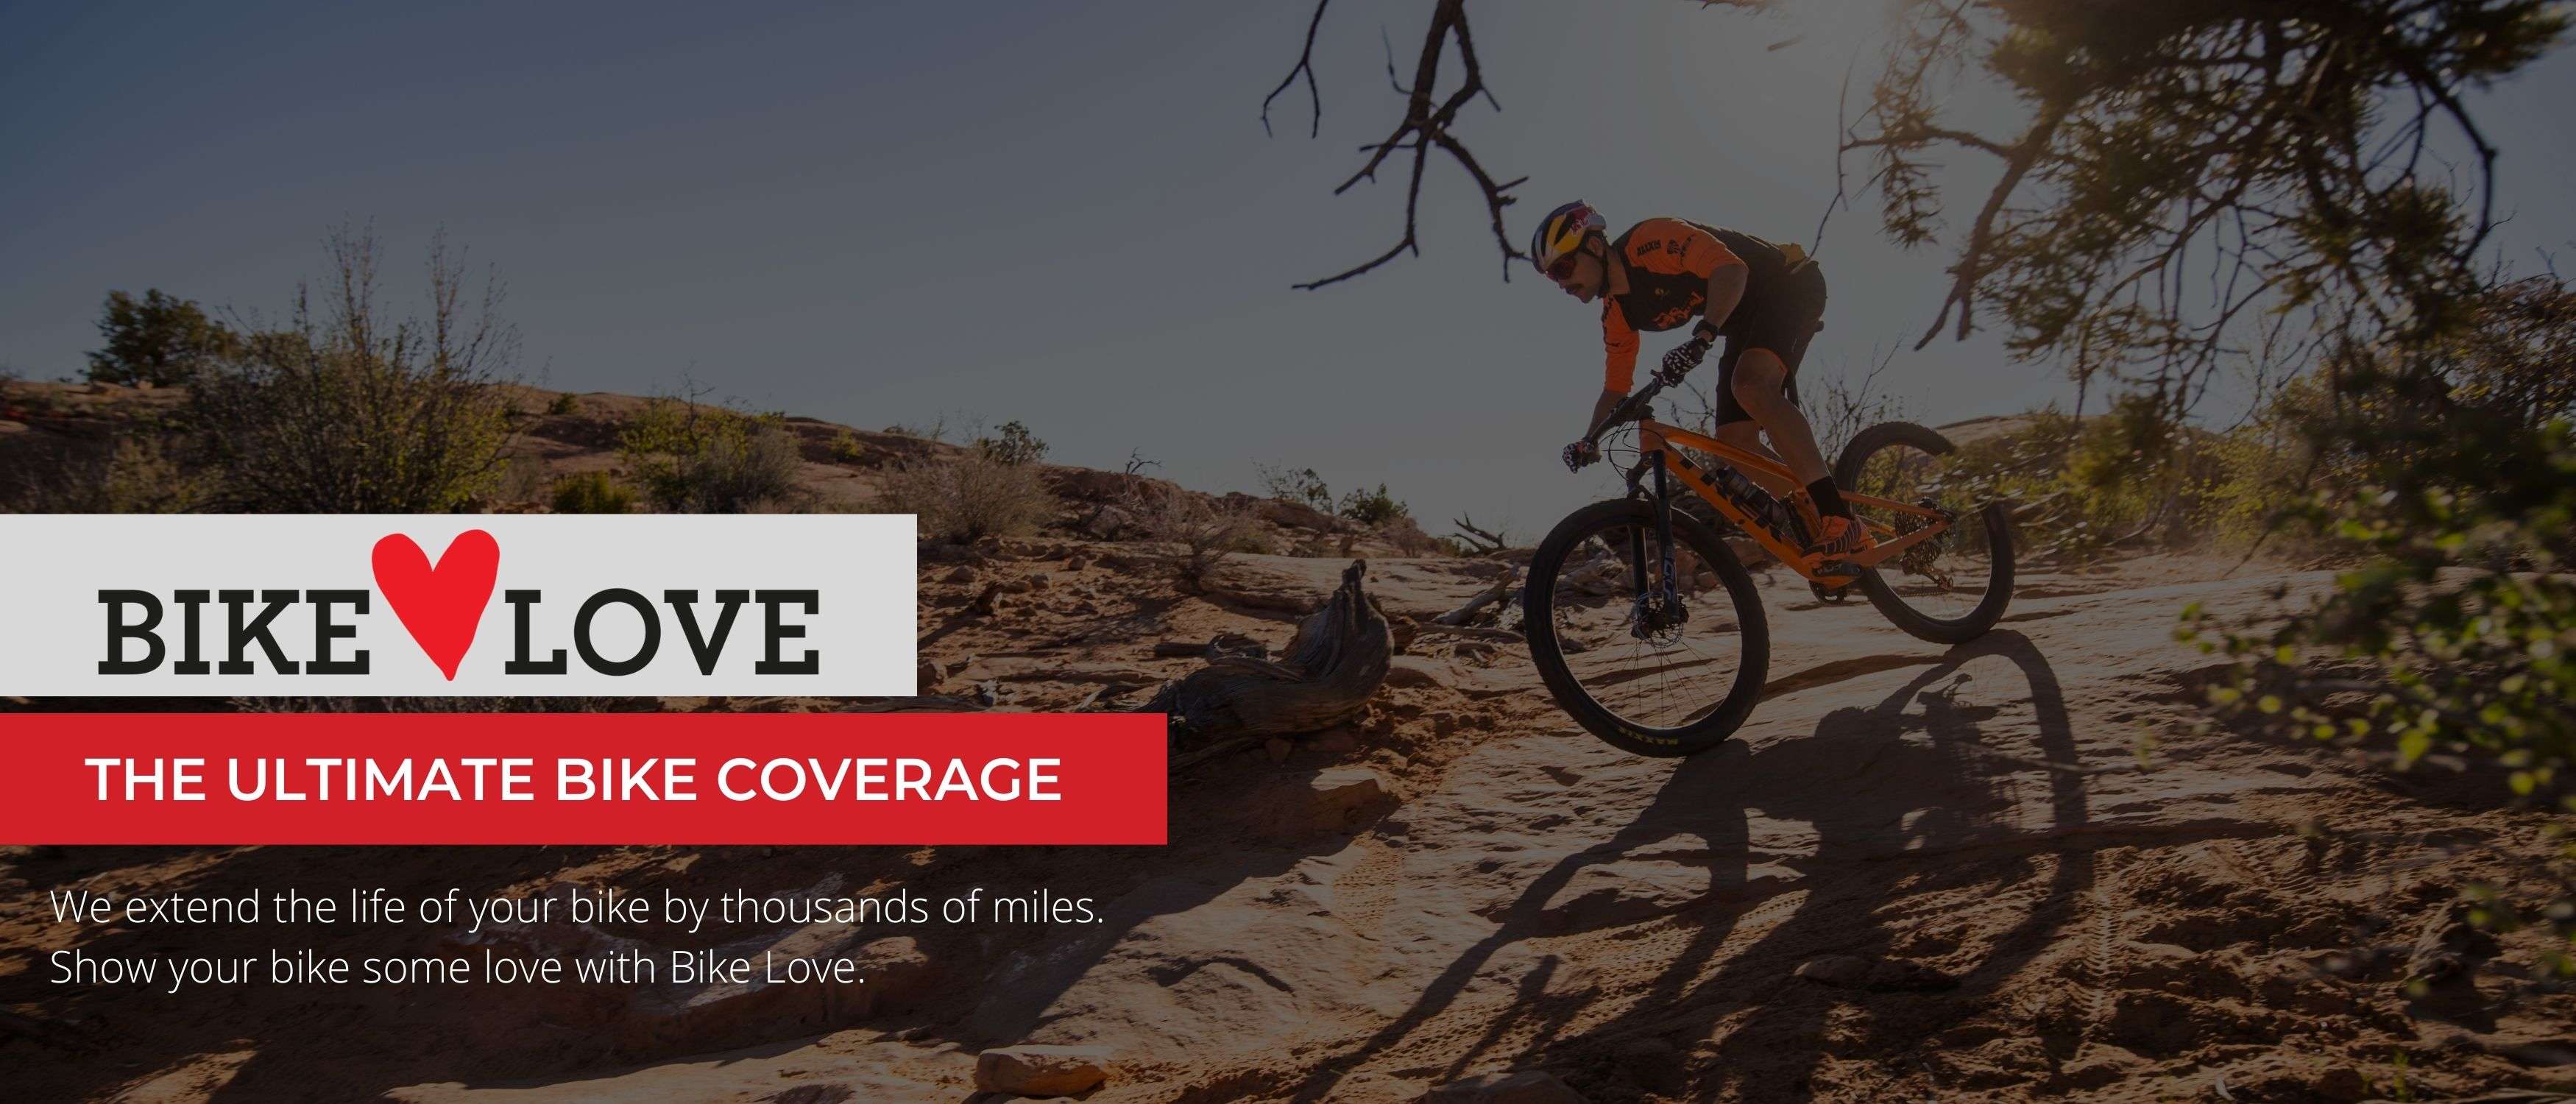 Bike Love The Ultimate Bike Coverage text and image of person on enduro mountain bike